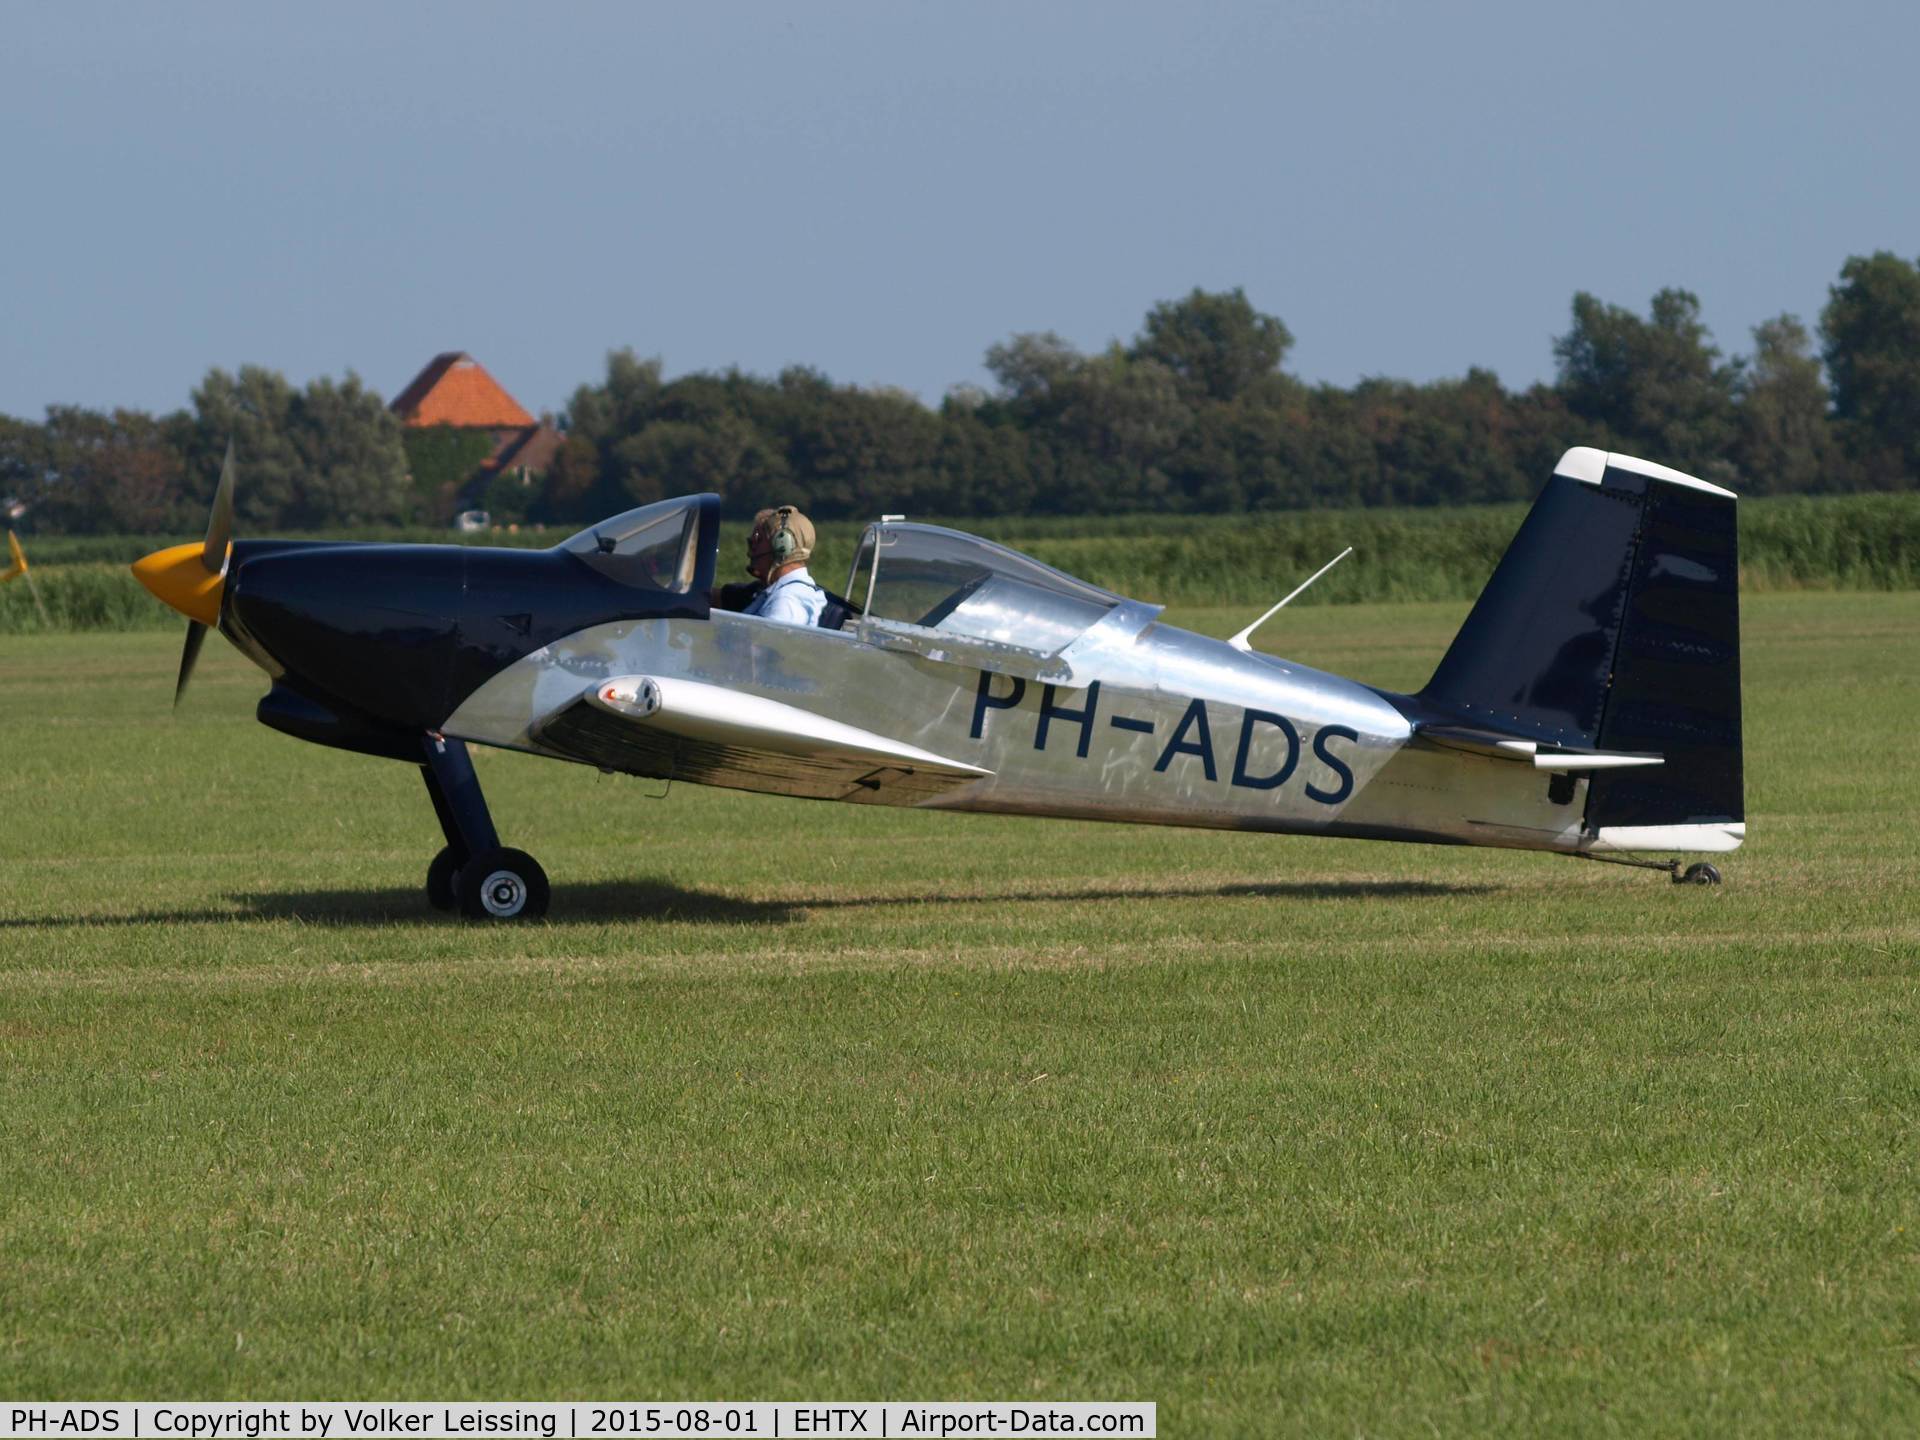 PH-ADS, 2013 Vans RV 7 C/N 73833, taxi to rwy after airshow